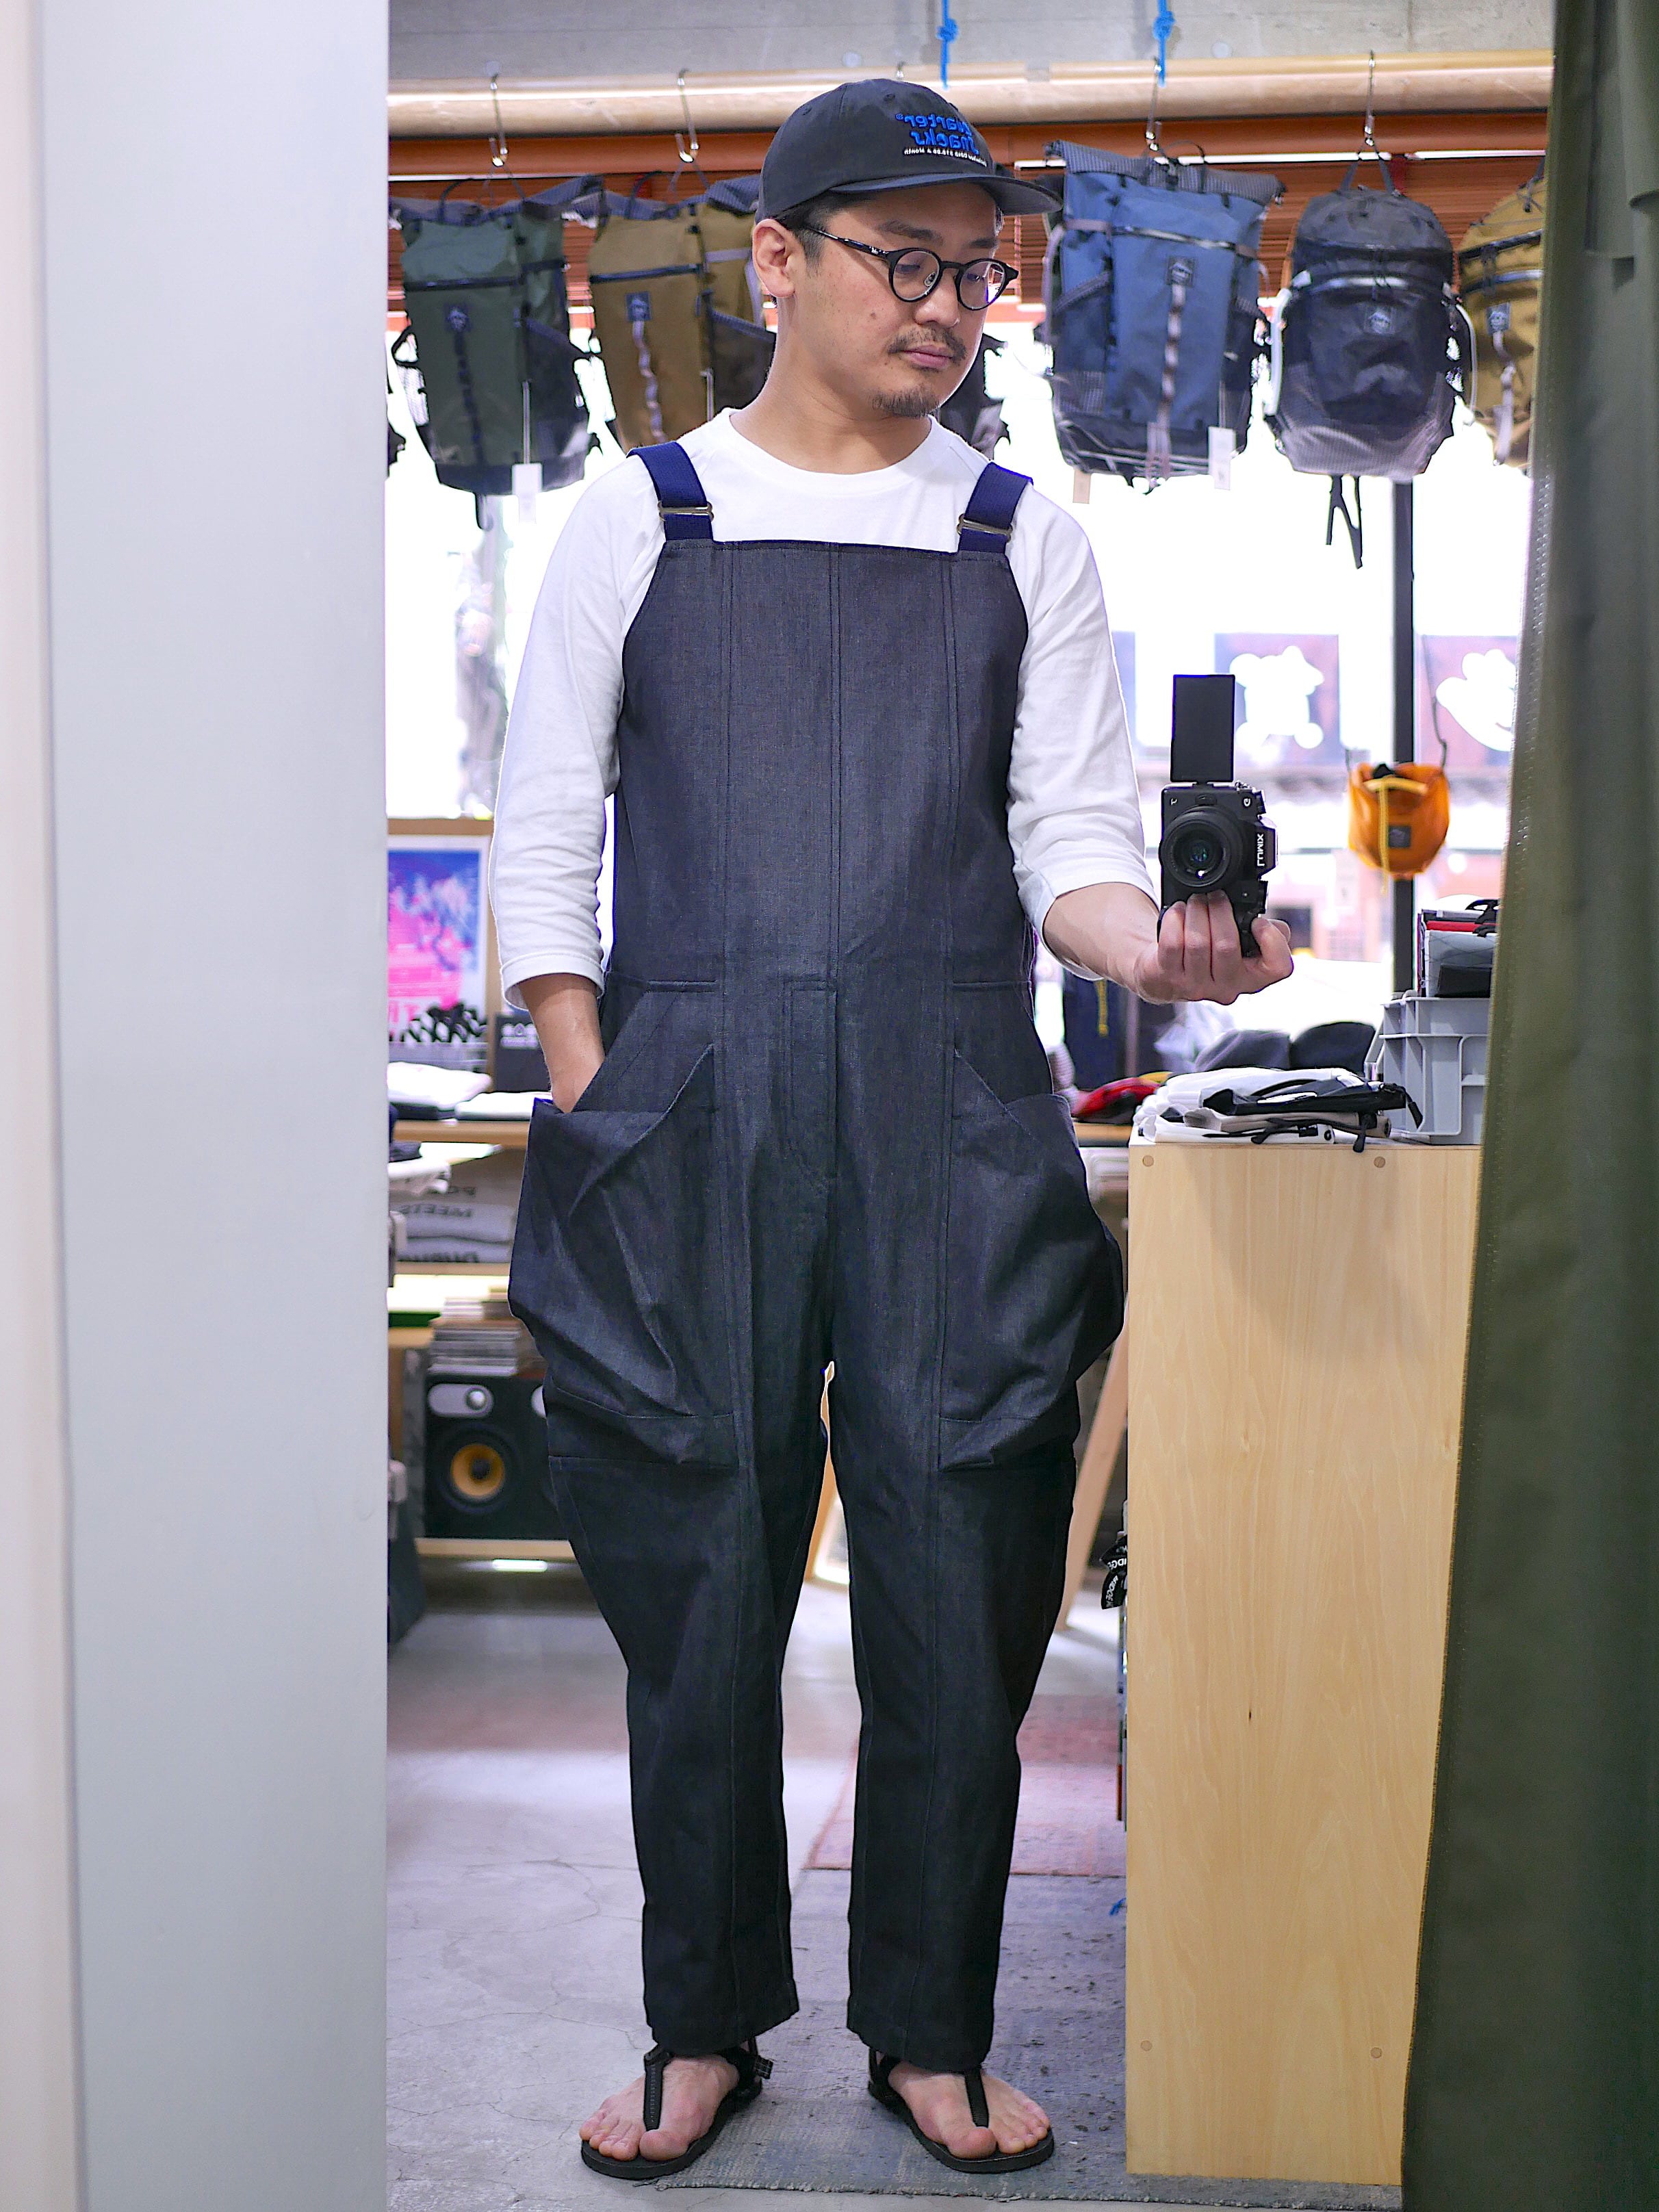 TROVE × GEARHOLIC / BIG POCKET OVERALL（DENIM） | st. valley house